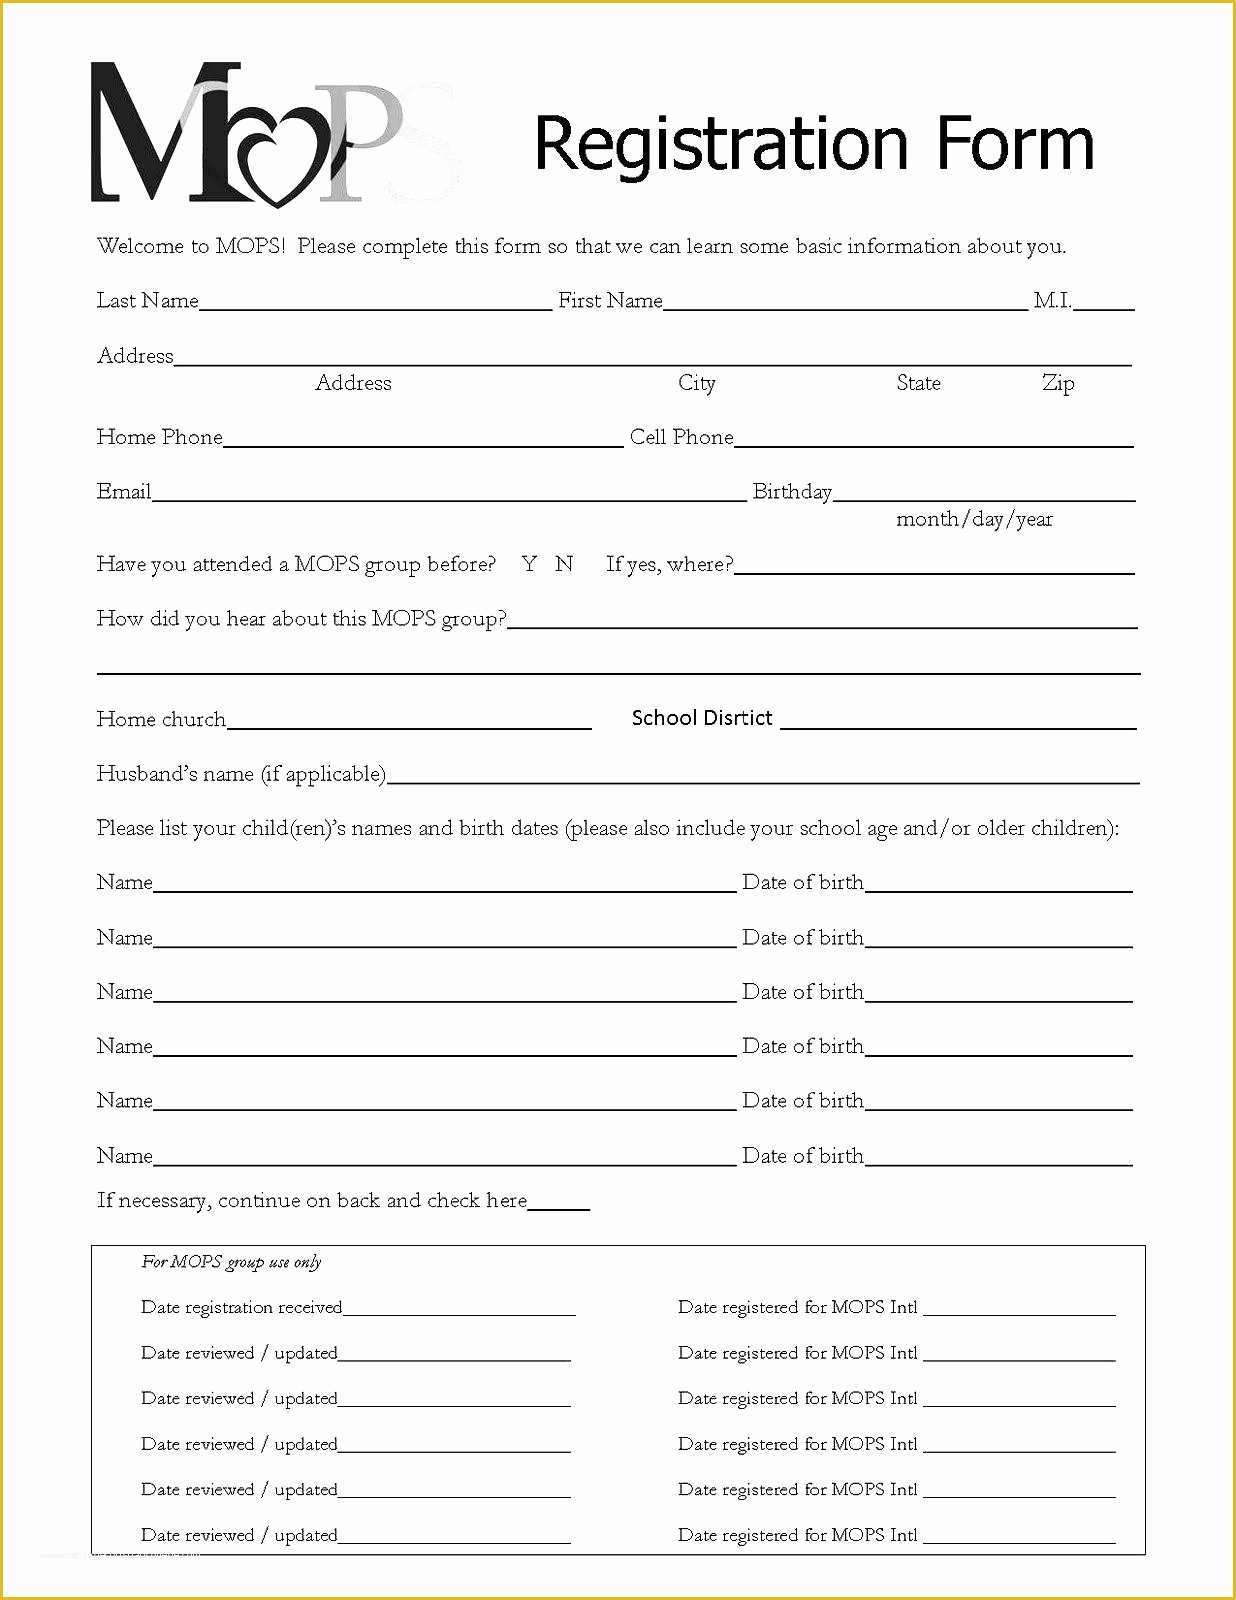 class-registration-form-template-free-of-registration-forms-template